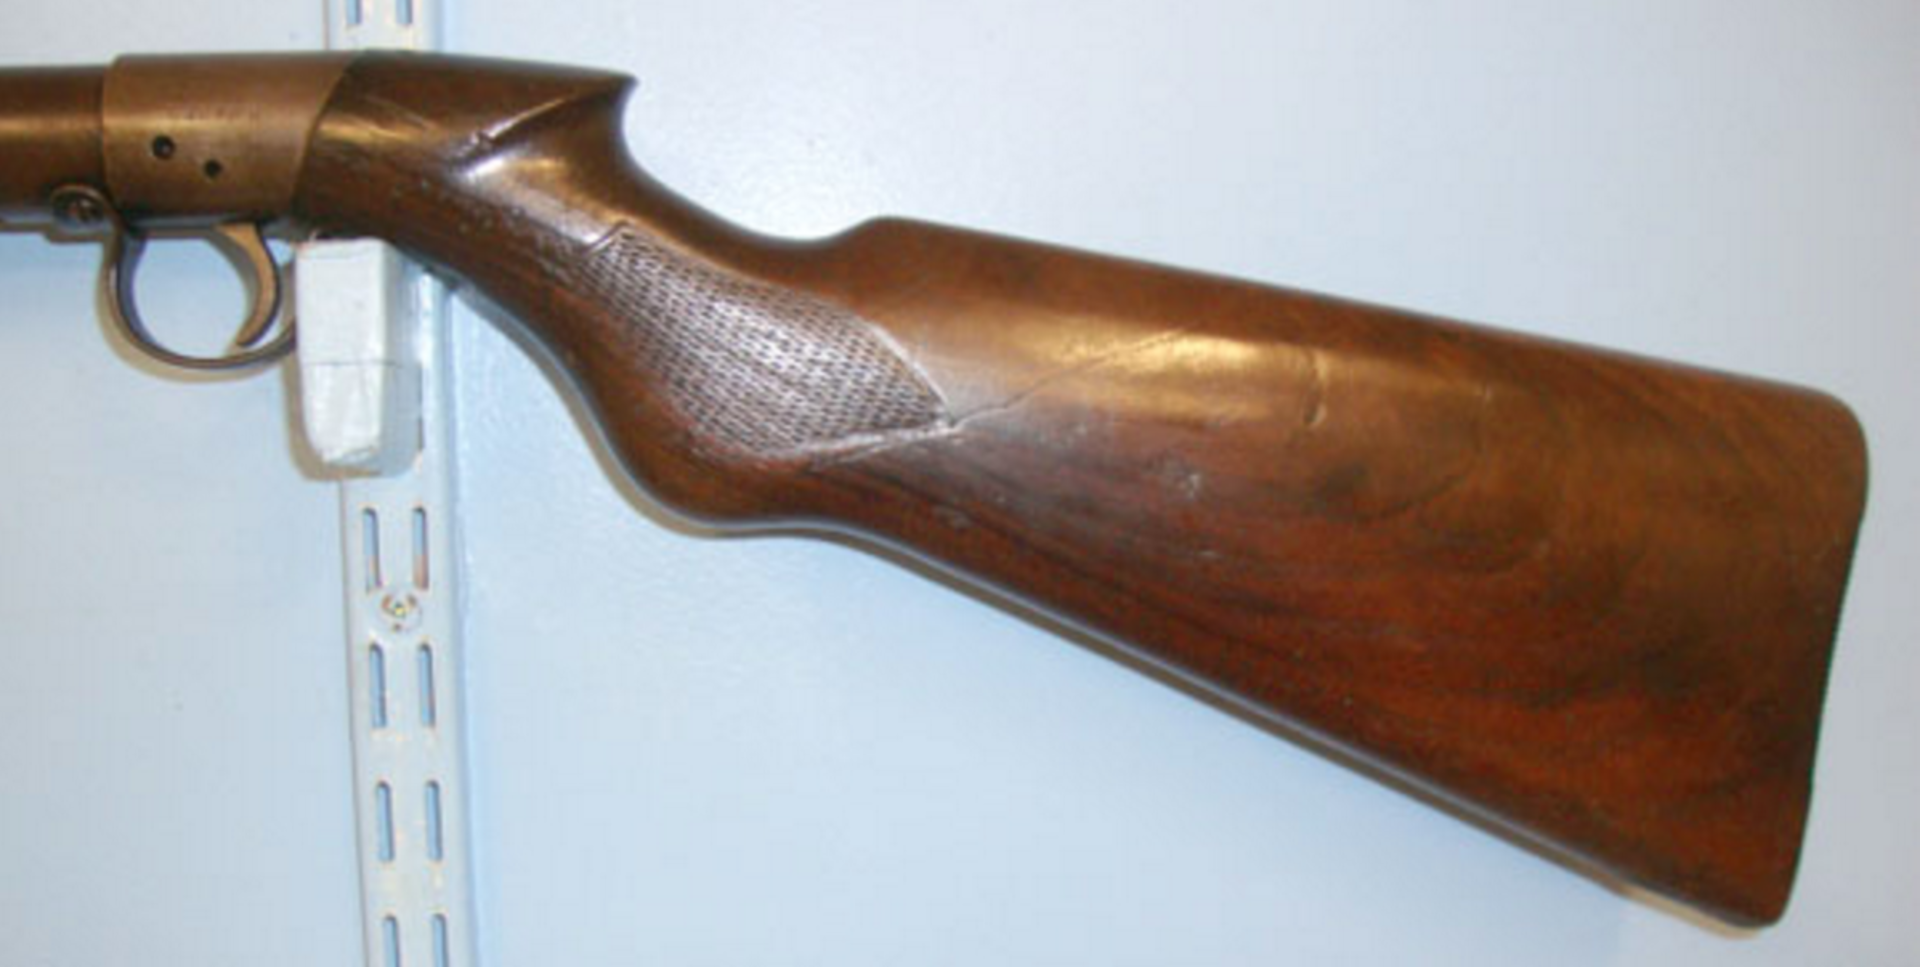 1923 to 1924 B.S.A. Standard No. 1 Model .177 Calibre Under Lever Air Rifle - Image 2 of 3